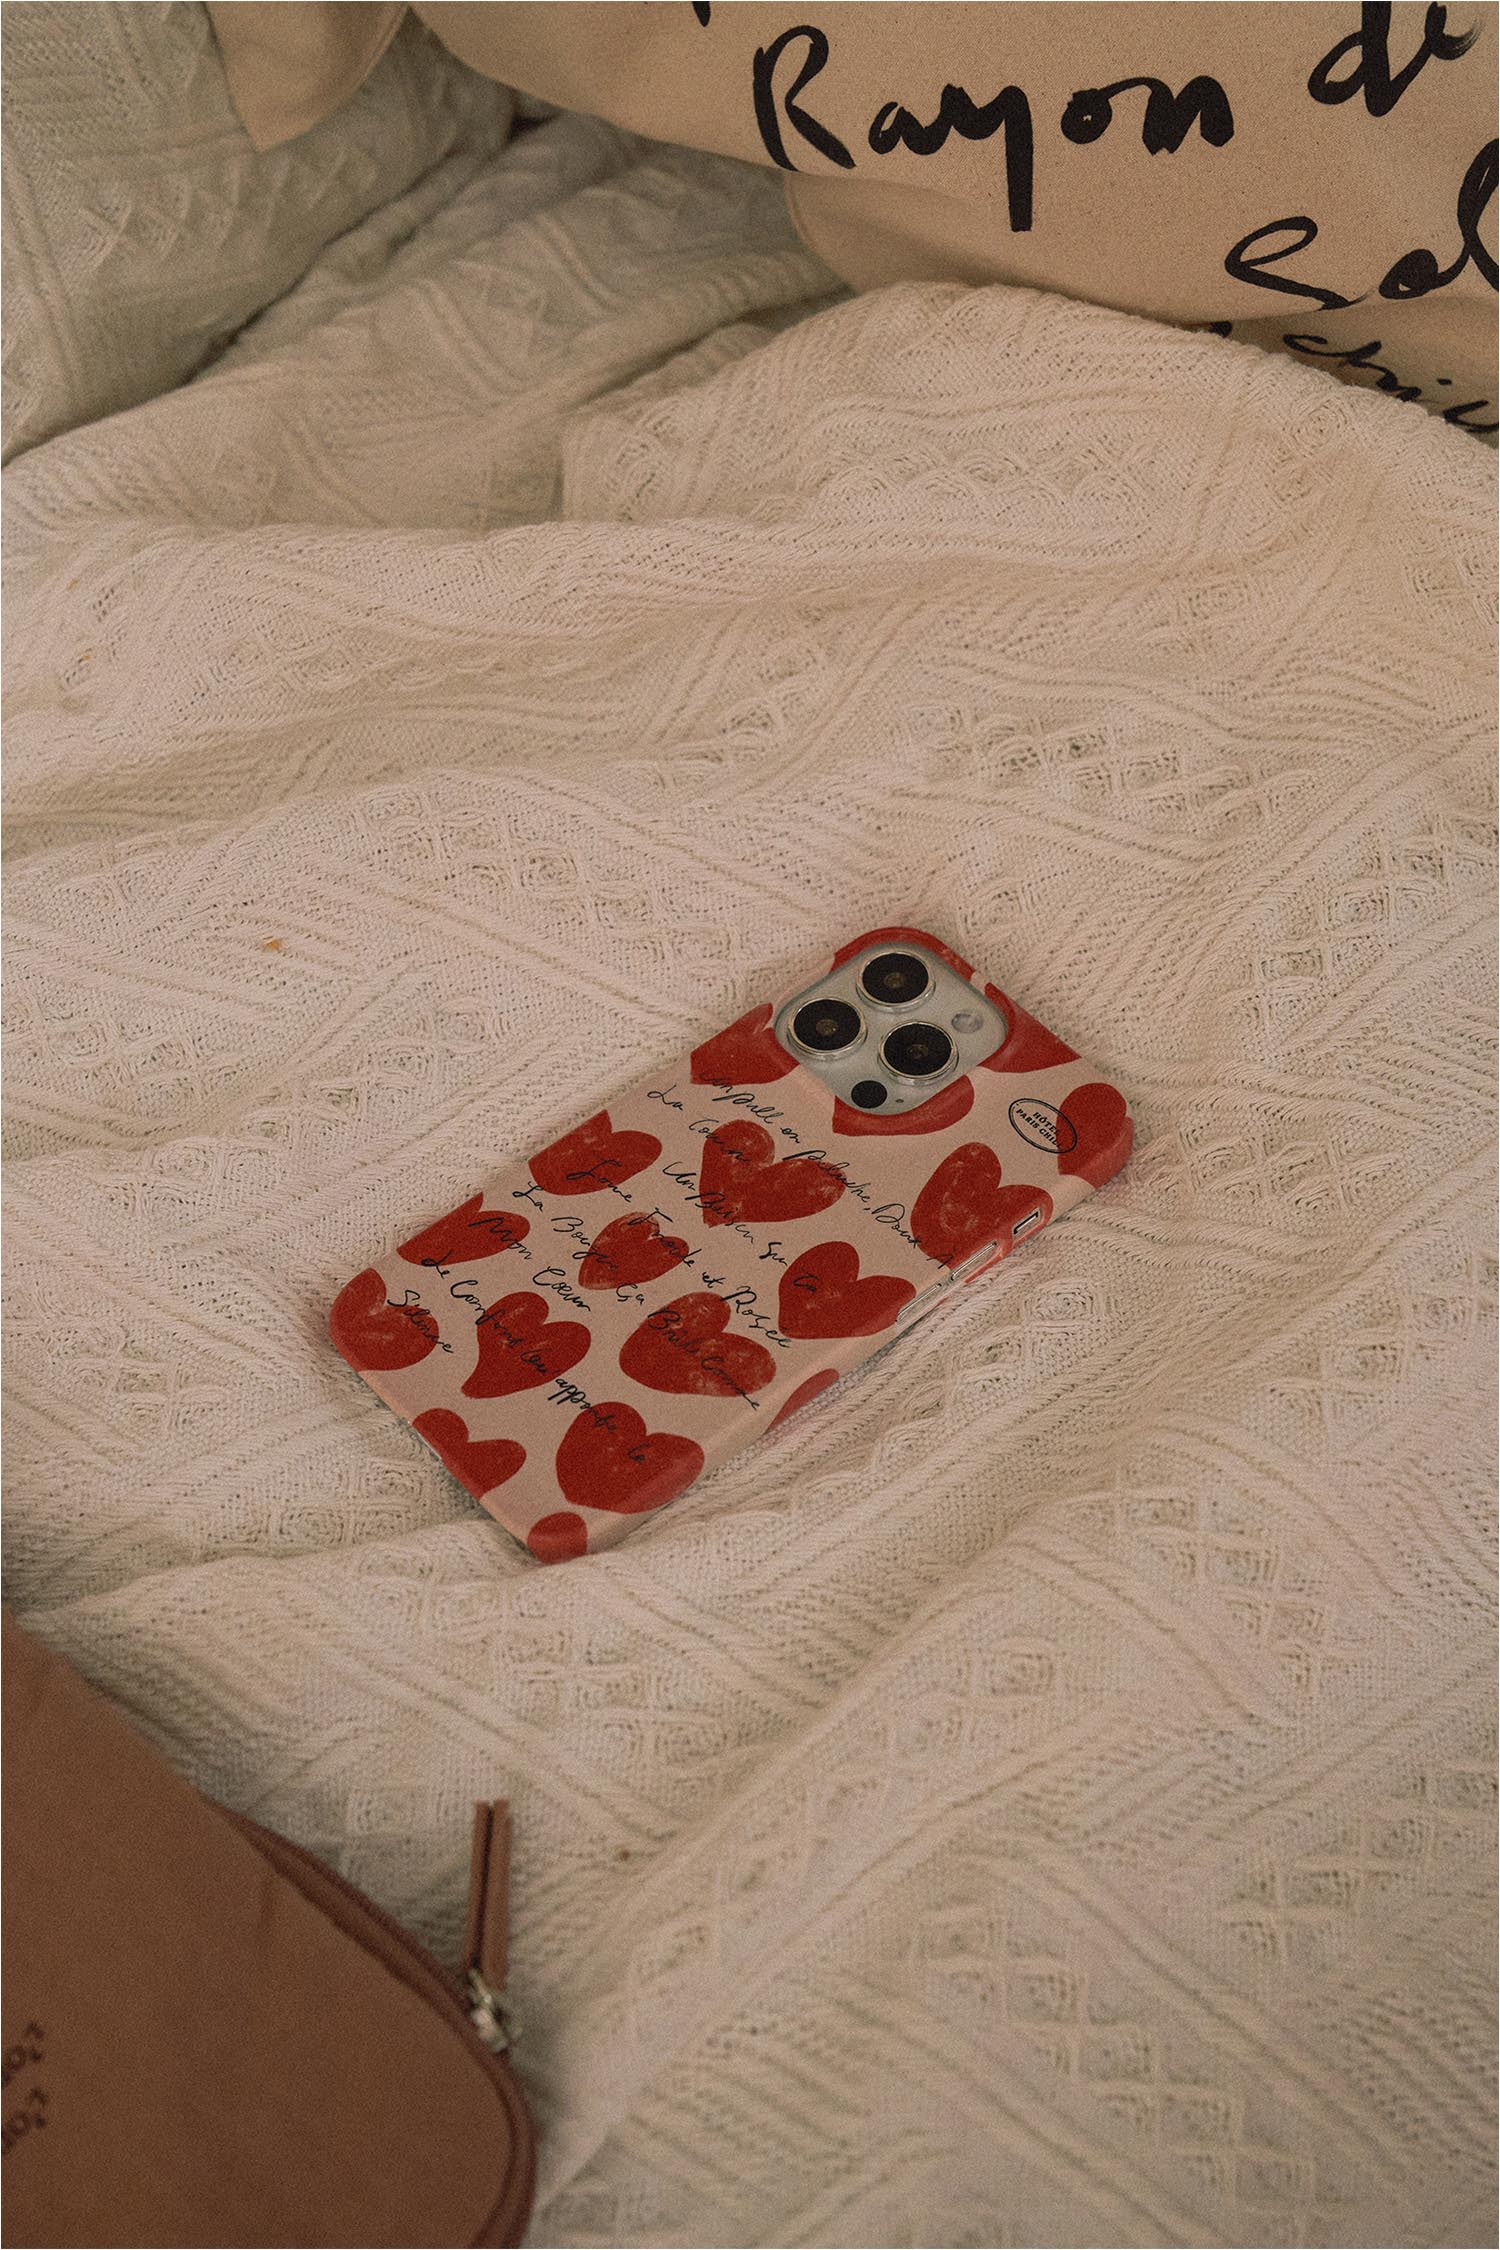 Different Shaped Hearts Phone Case